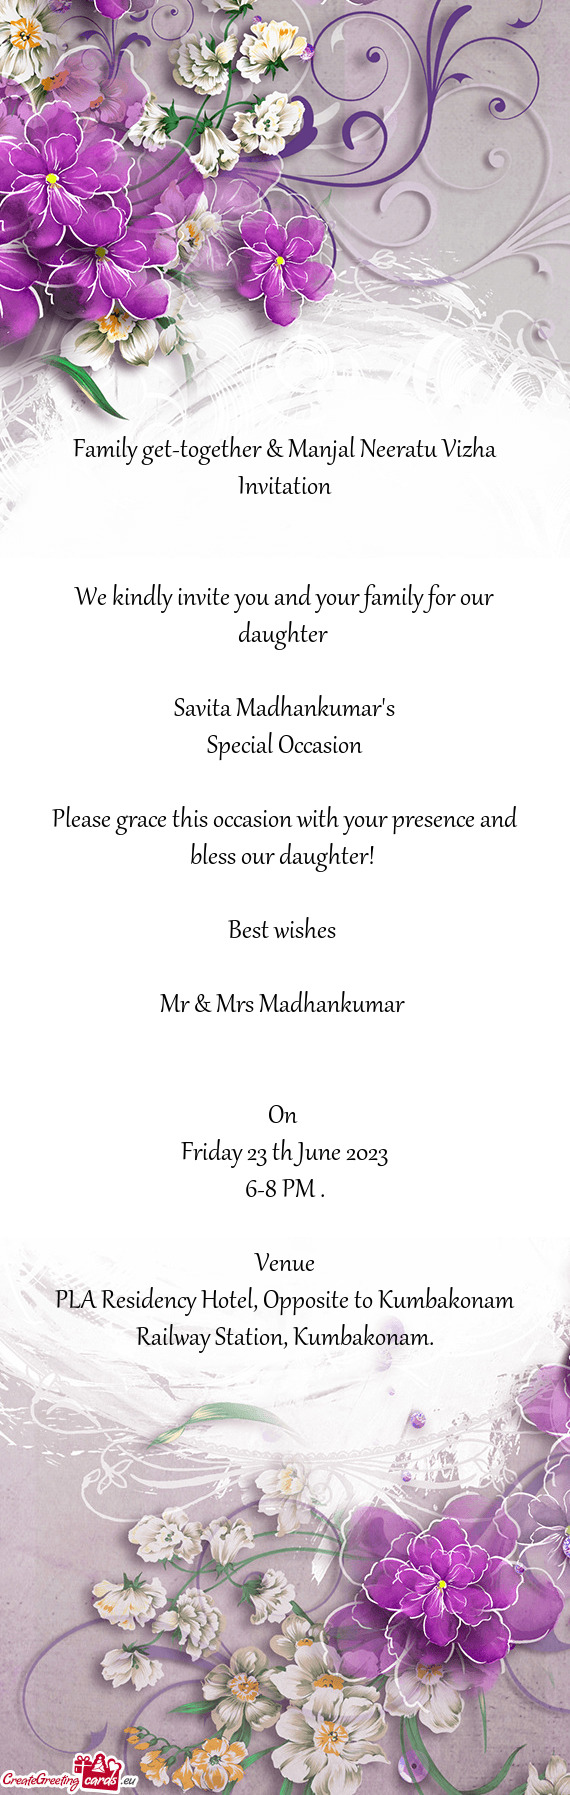 We kindly invite you and your family for our daughter